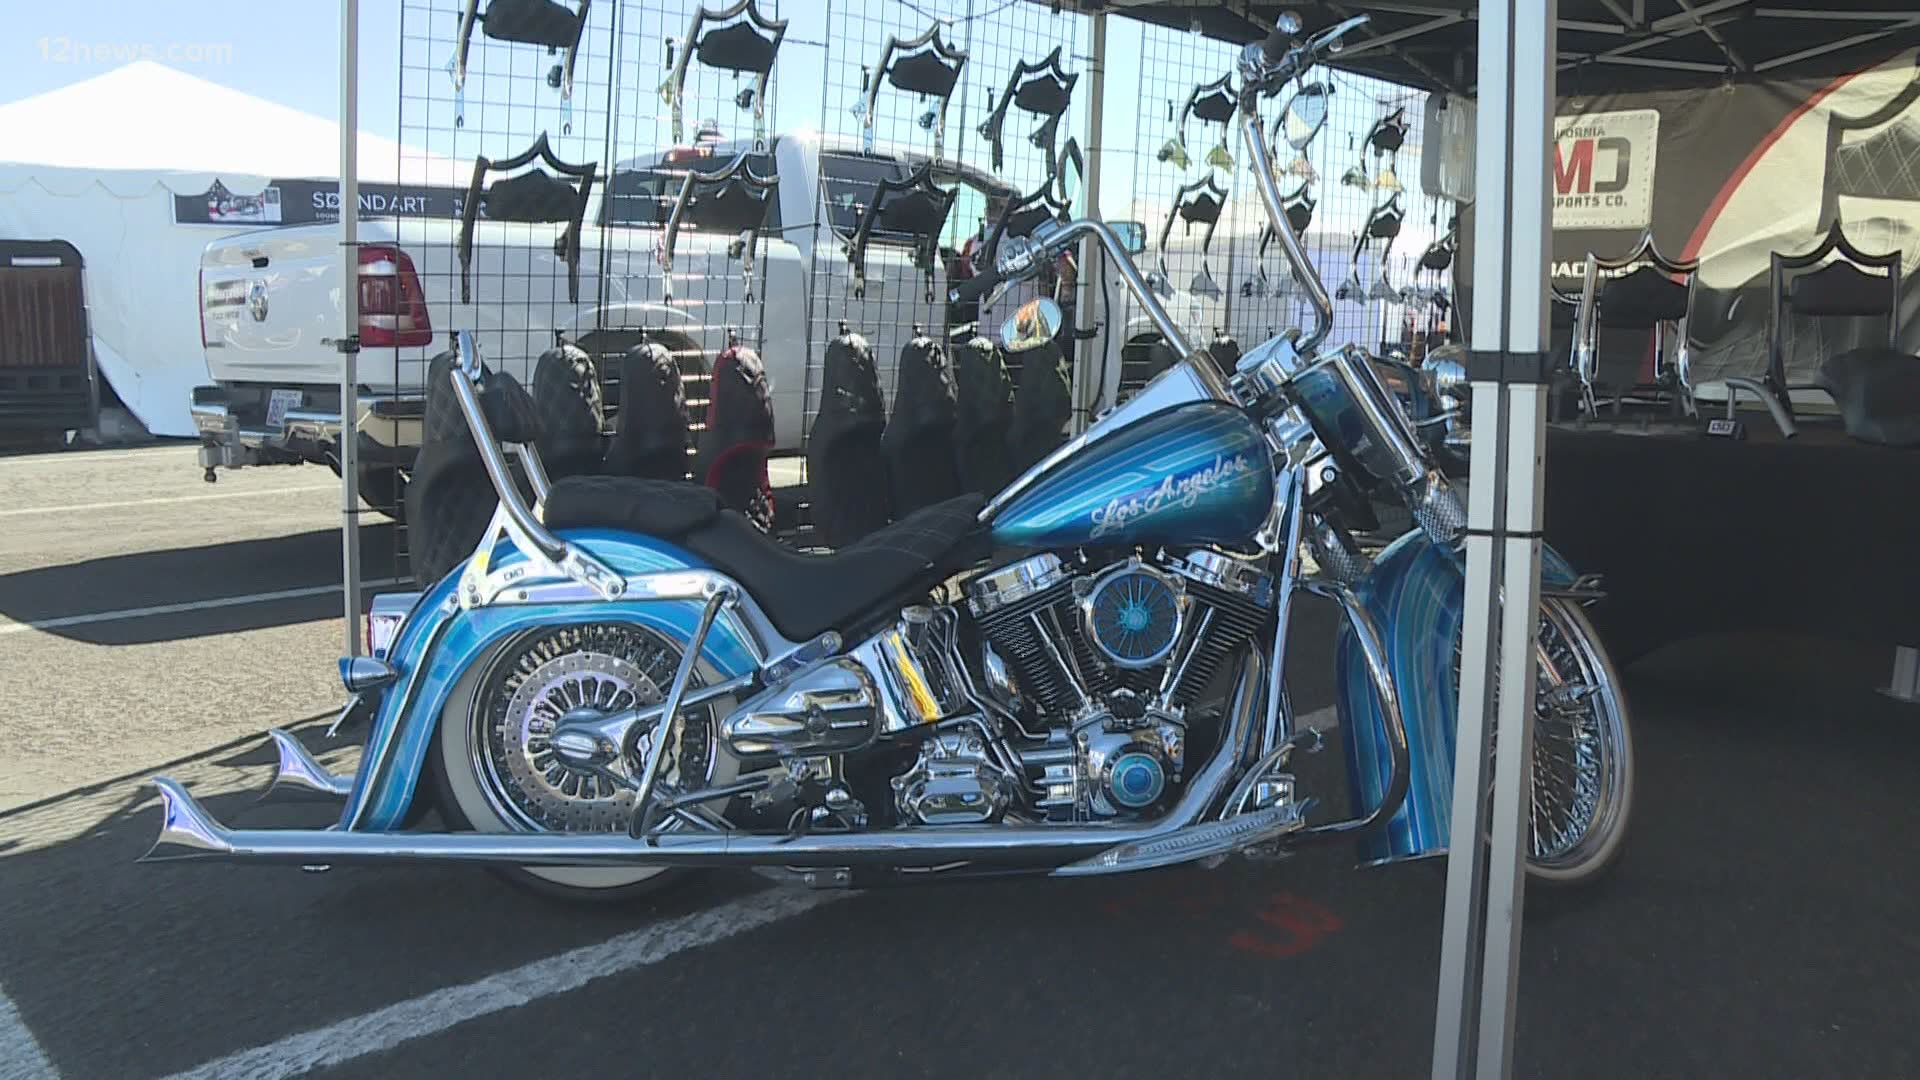 The 24th Annual Arizona Bike Week in Scottsdale kicked off Friday. This year's event is about bringing people back together while following COVID-19 protocols.